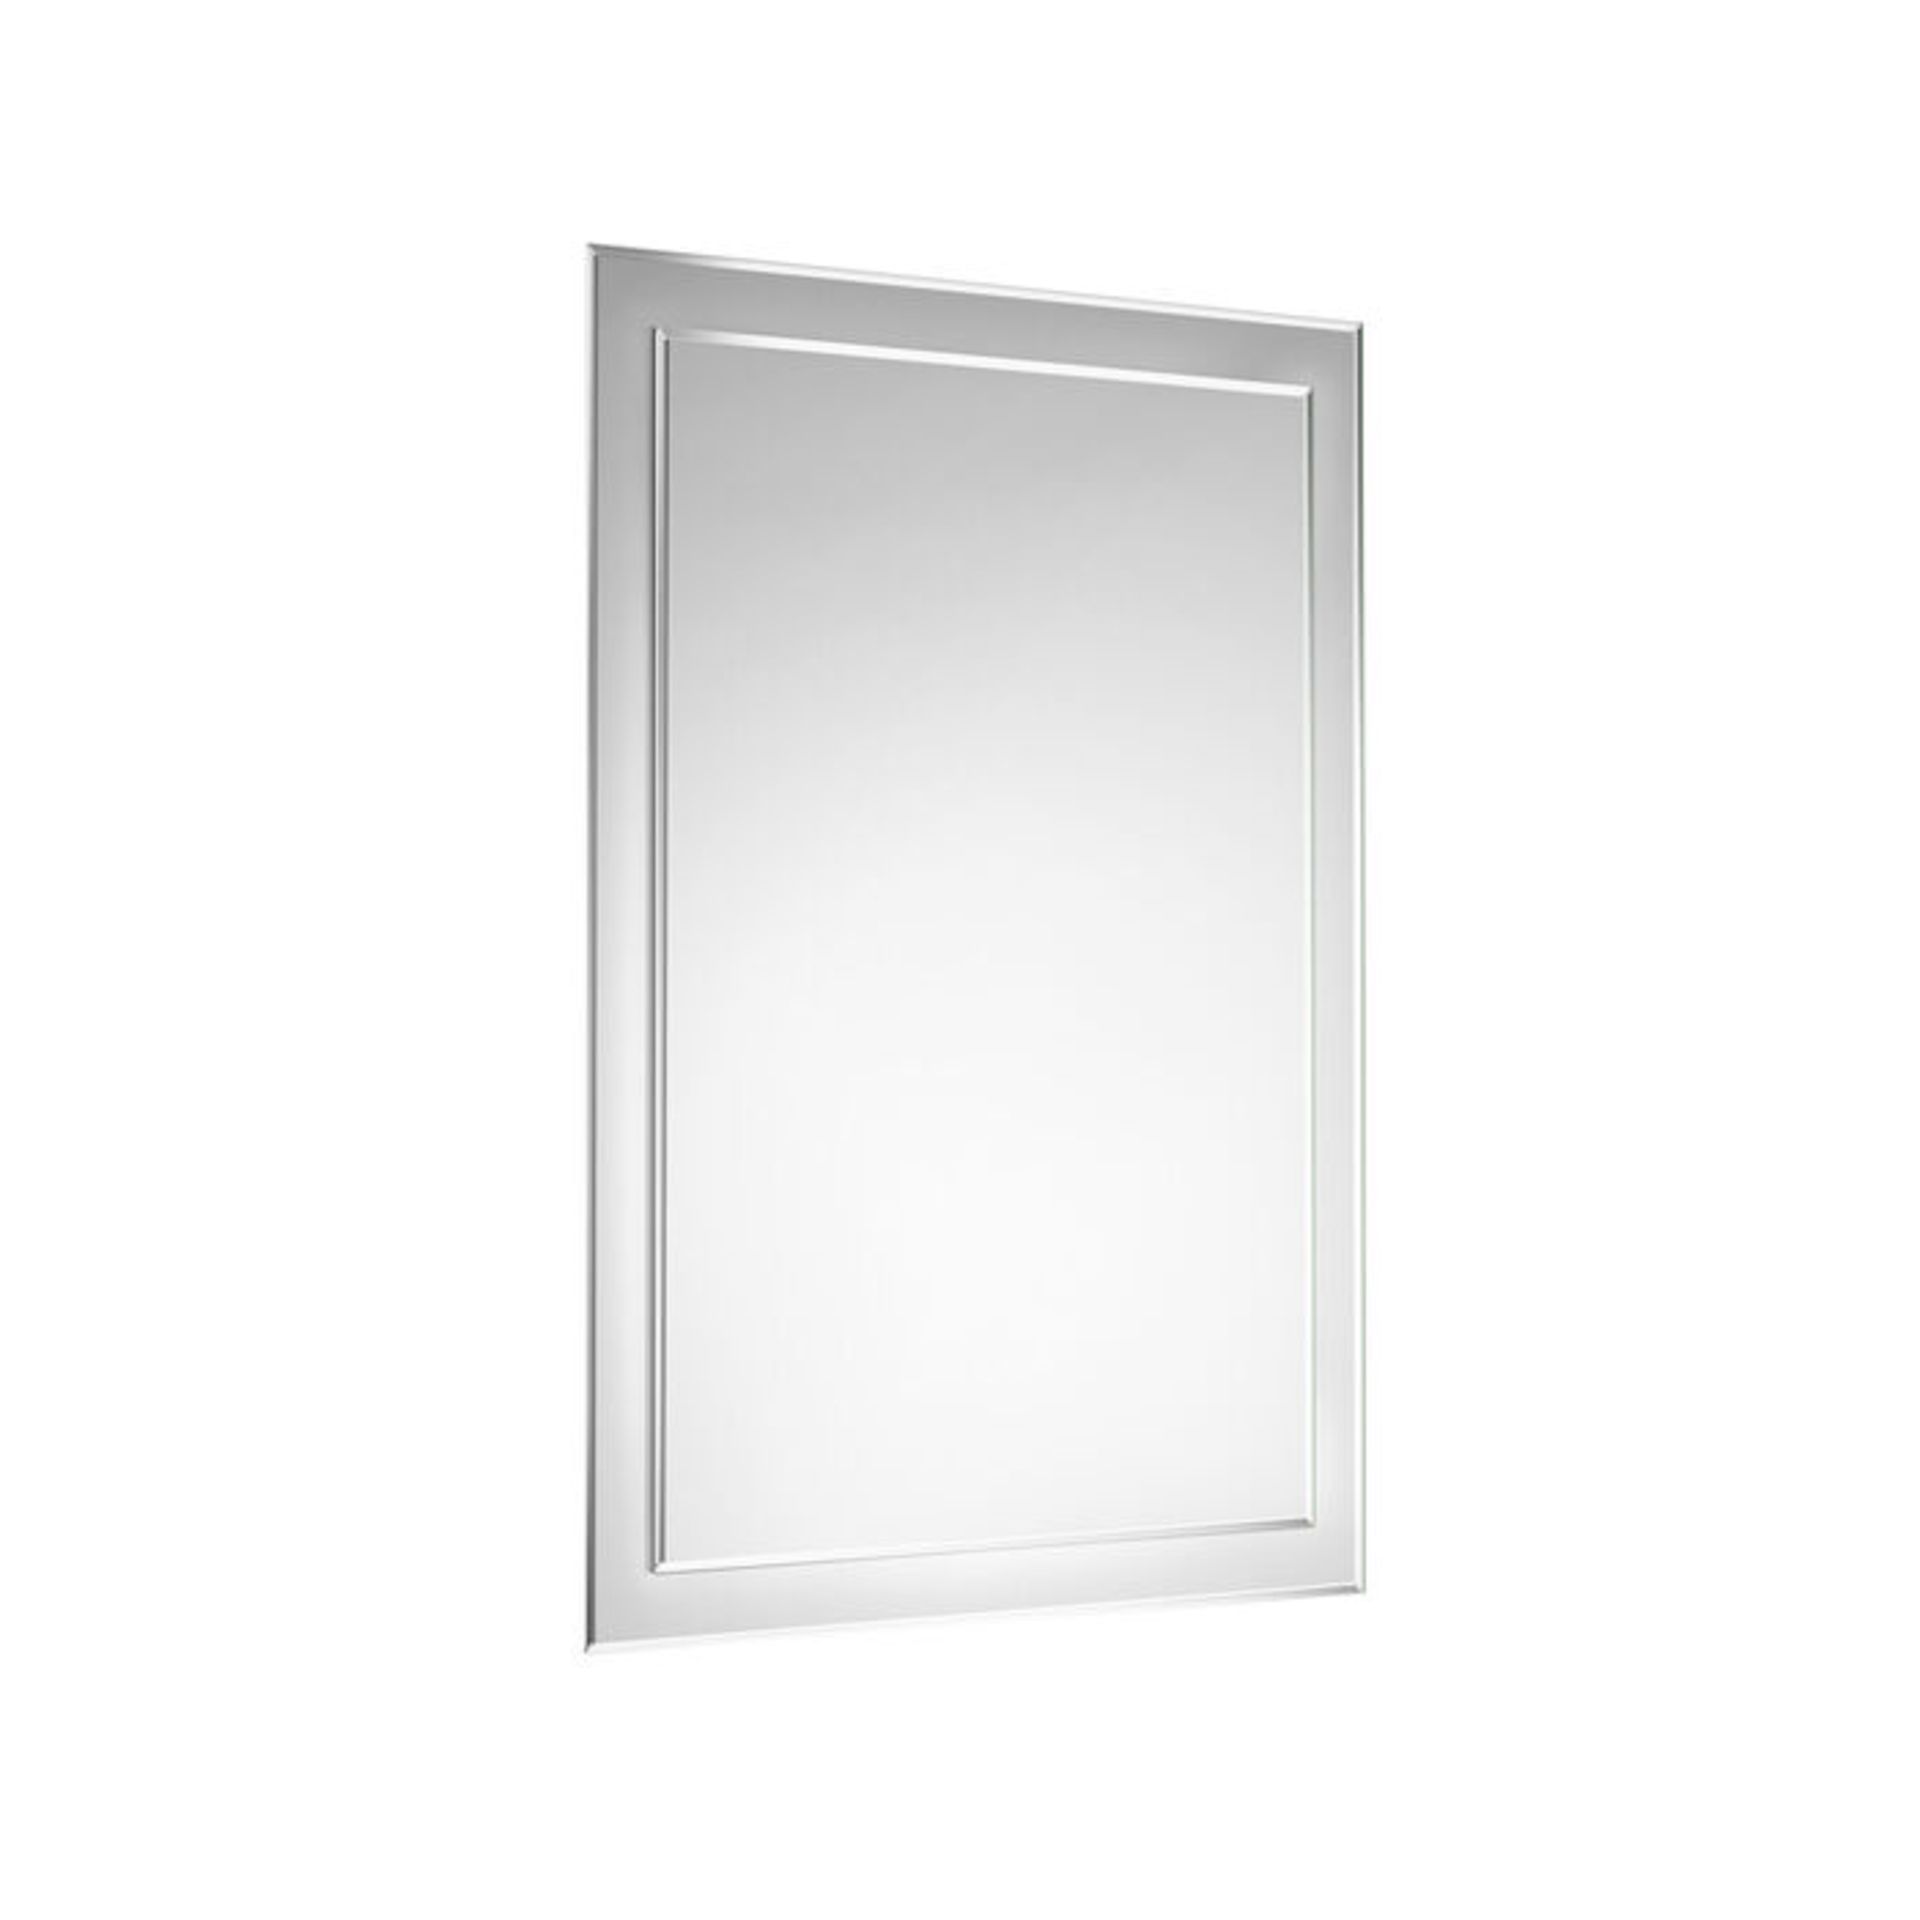 500x700mm Bevel Mirror . Comes fully assembled for added convenience Versatile with a choice of... - Image 2 of 2